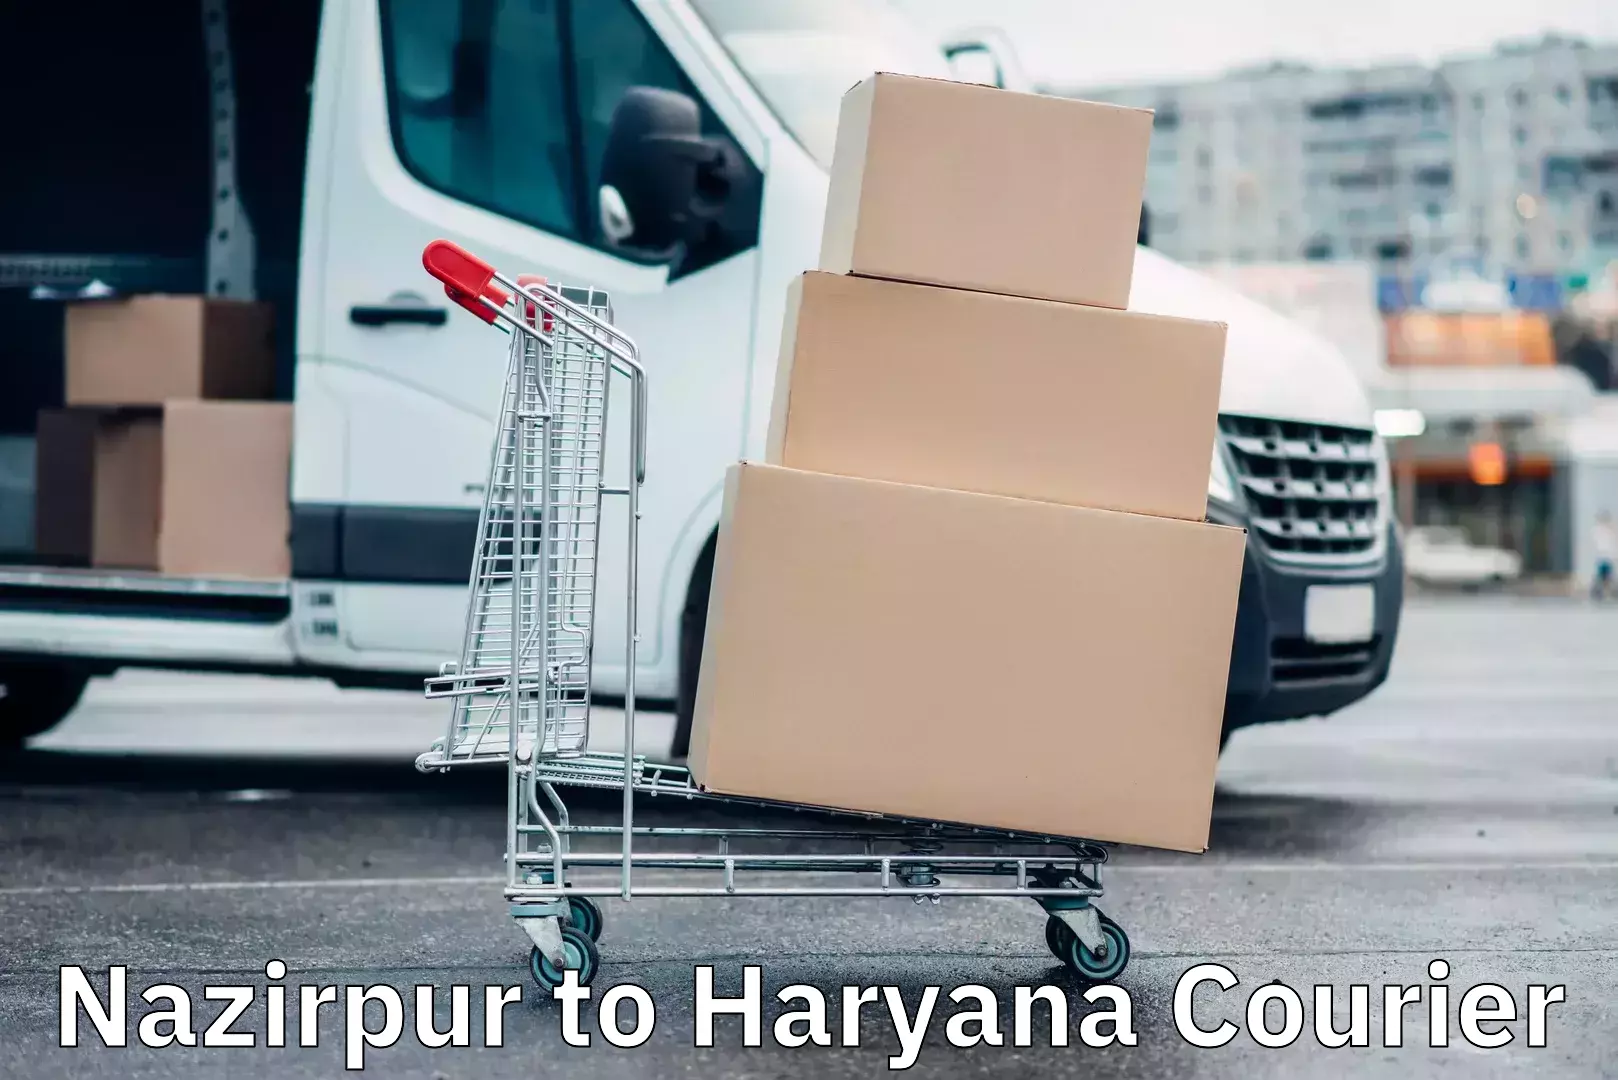 24/7 courier service Nazirpur to Haryana